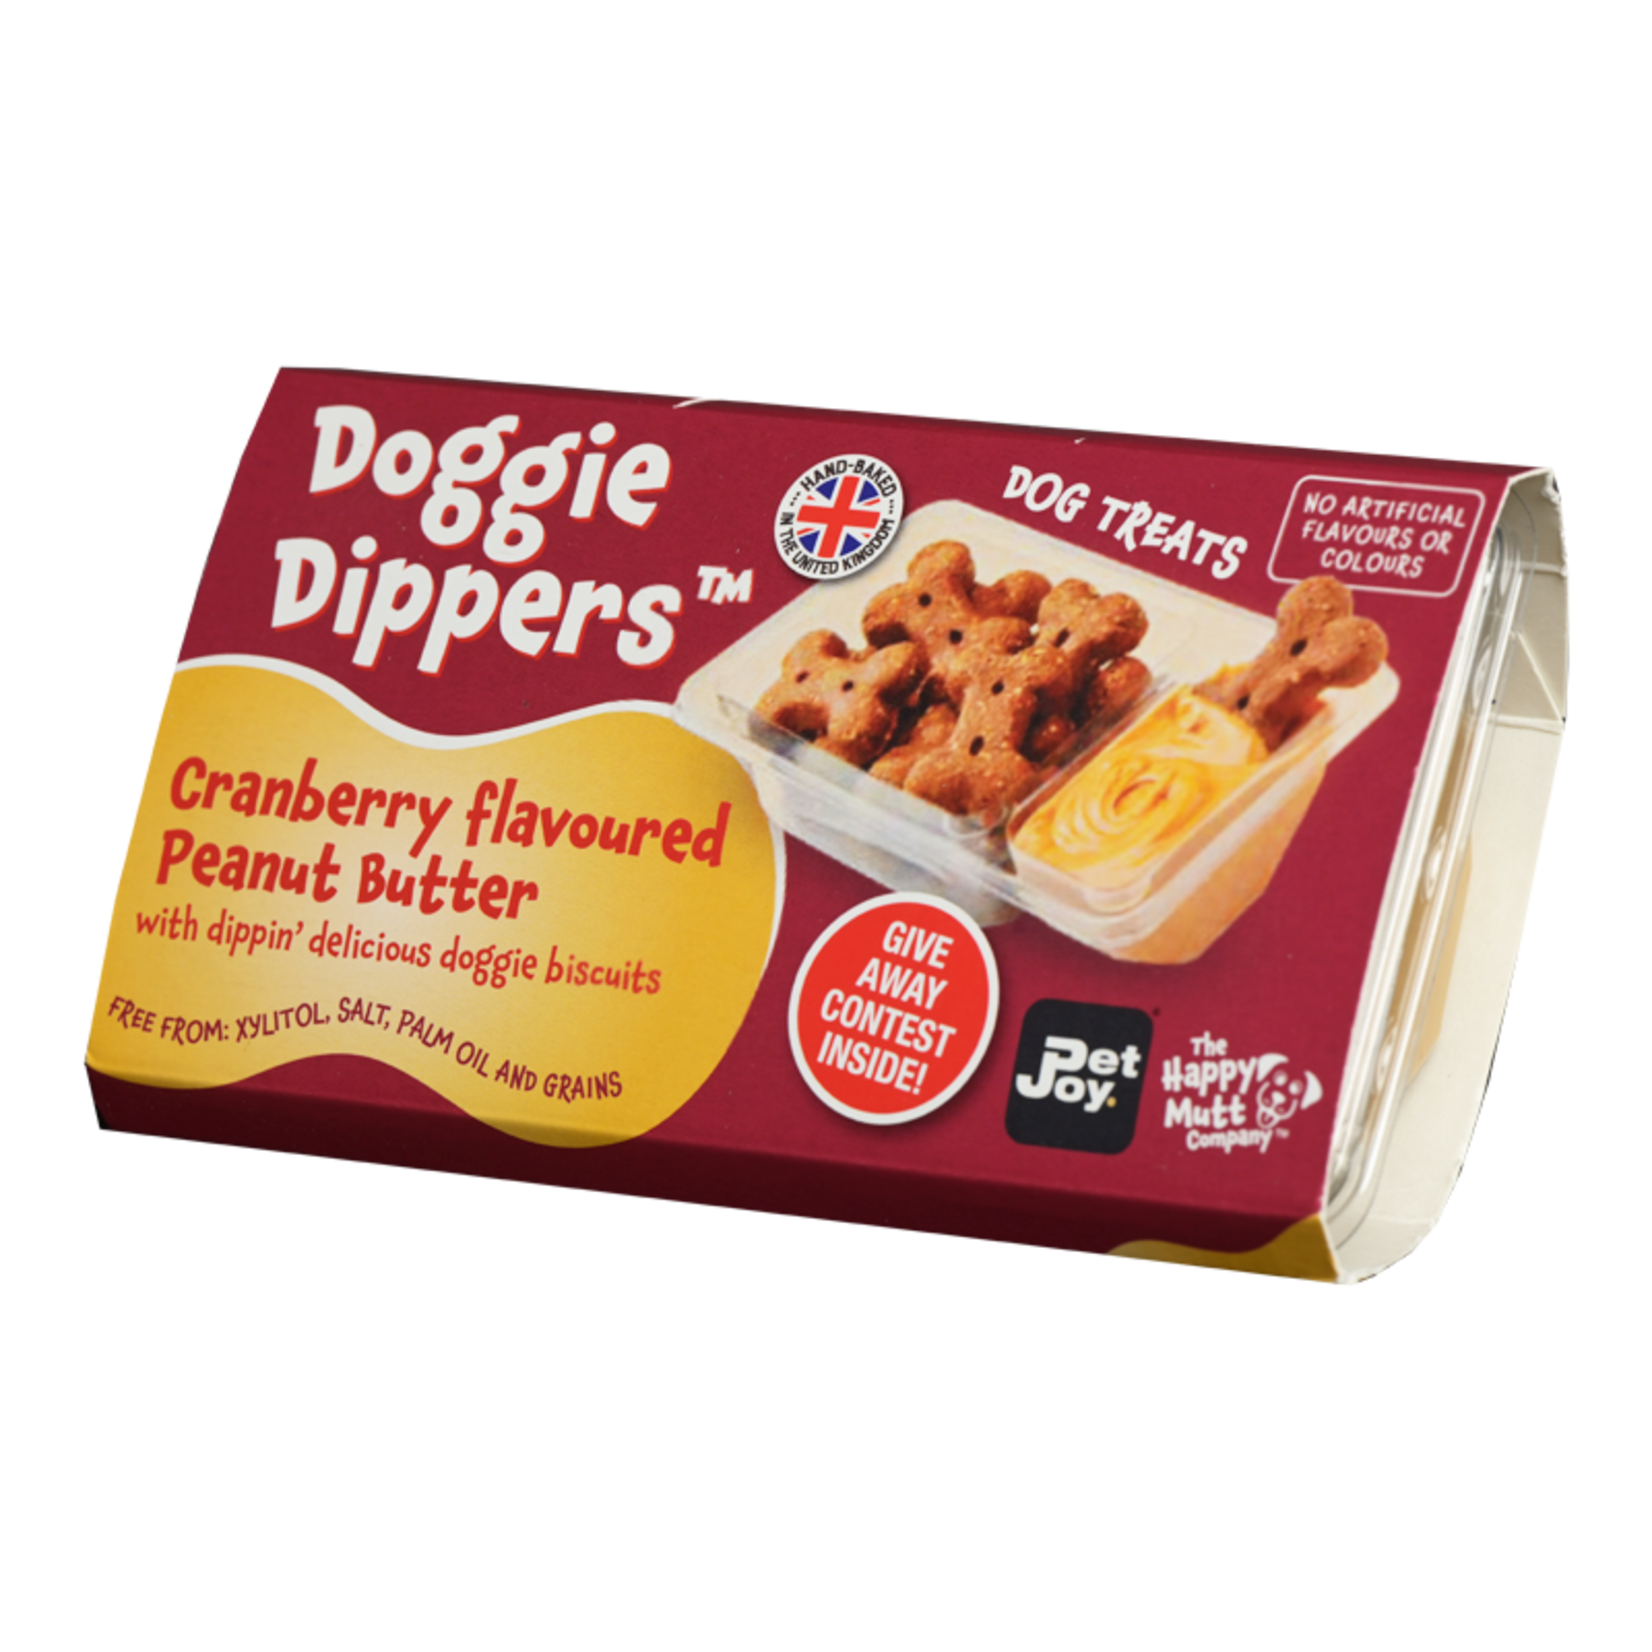 Doggie Dippers Pet Joy x Happy Mutt company - Doggie Dippers Cranberry